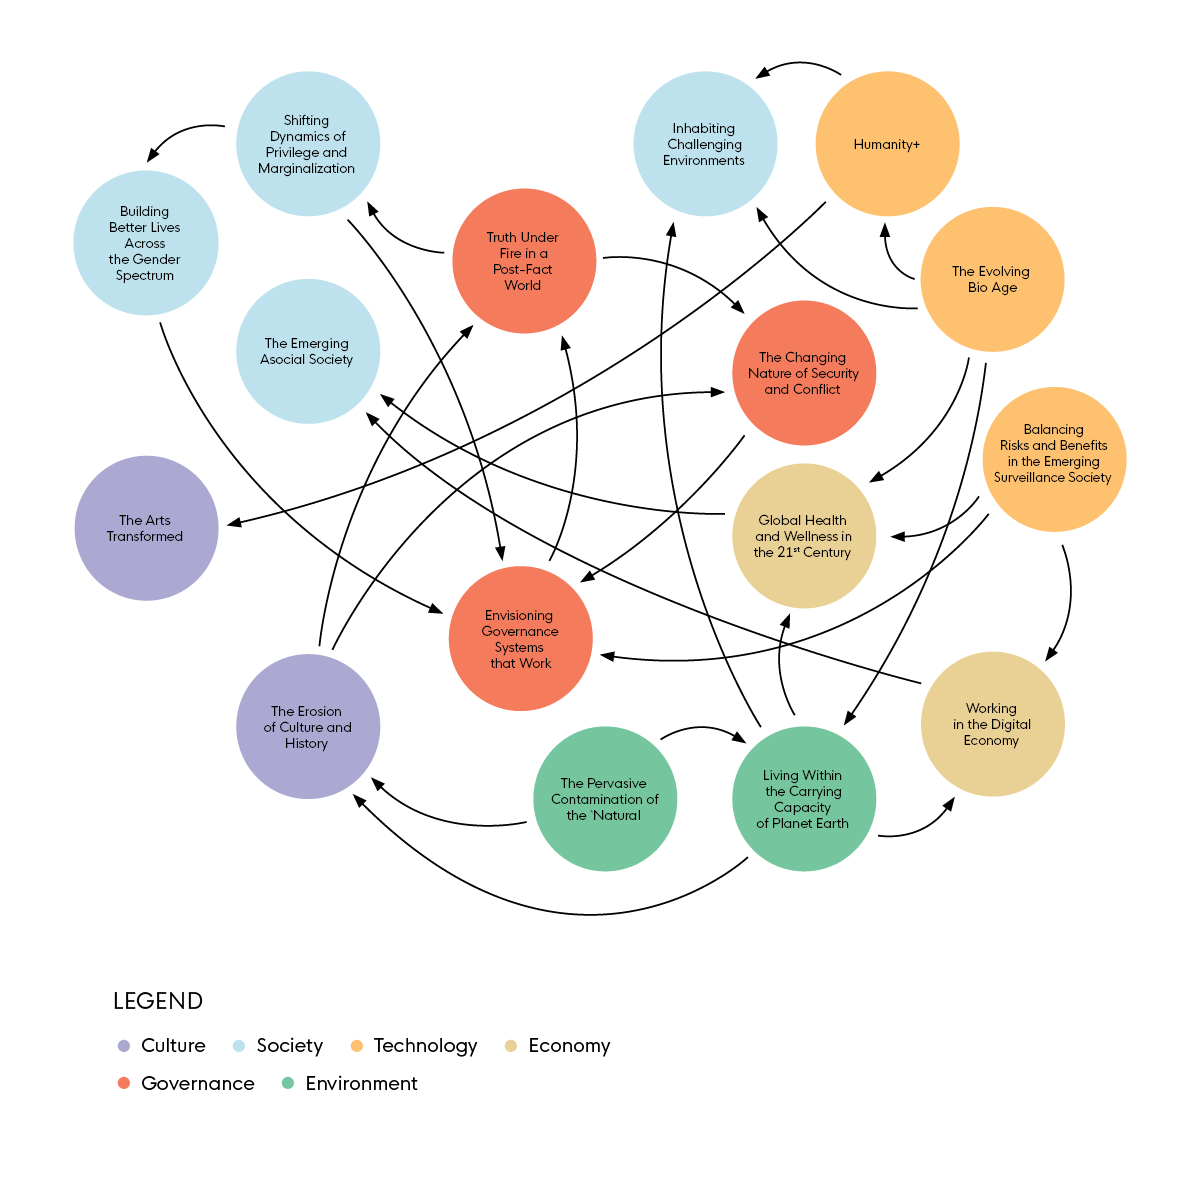 This image is entitled: 'System Map of the Challenges.' It illustrates the 16 emerging global challenges and how they are interlinked.